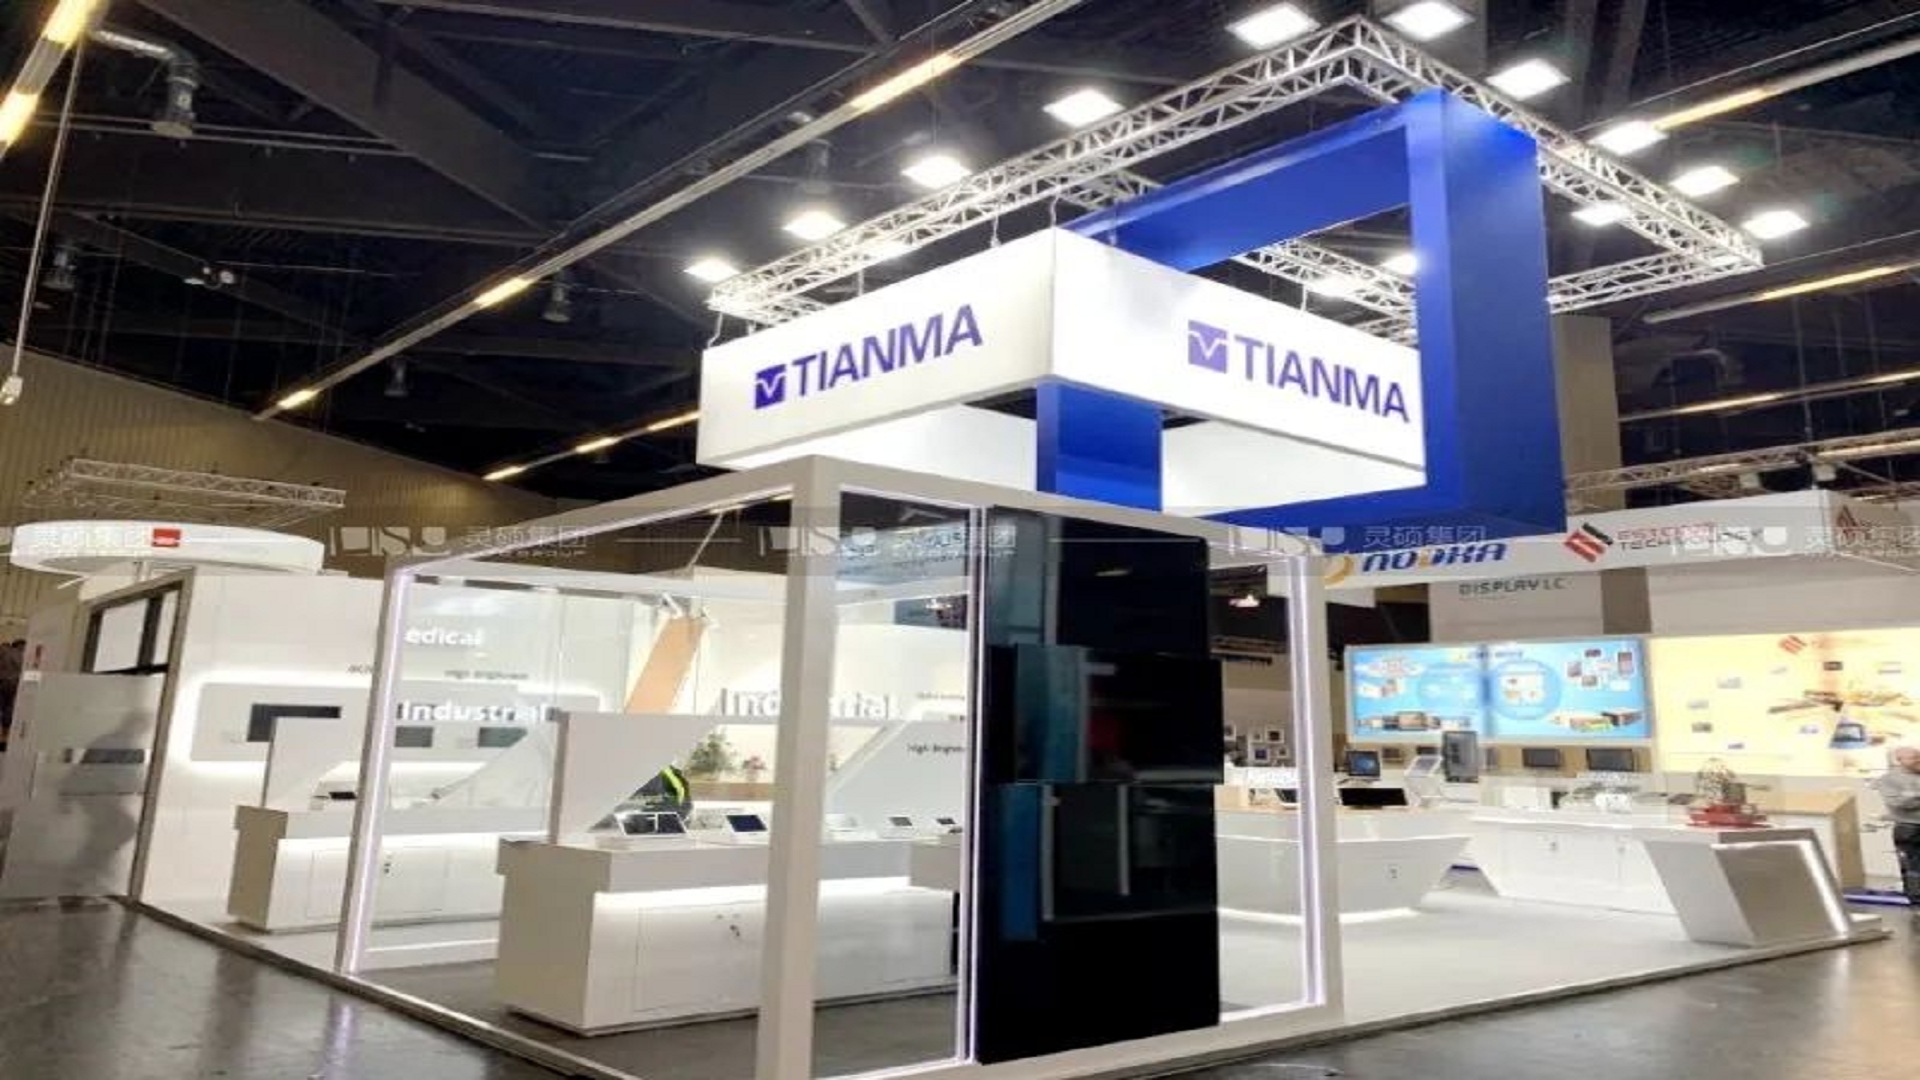 Tianma-Embedded Exhibition in Nuremberg, Germany